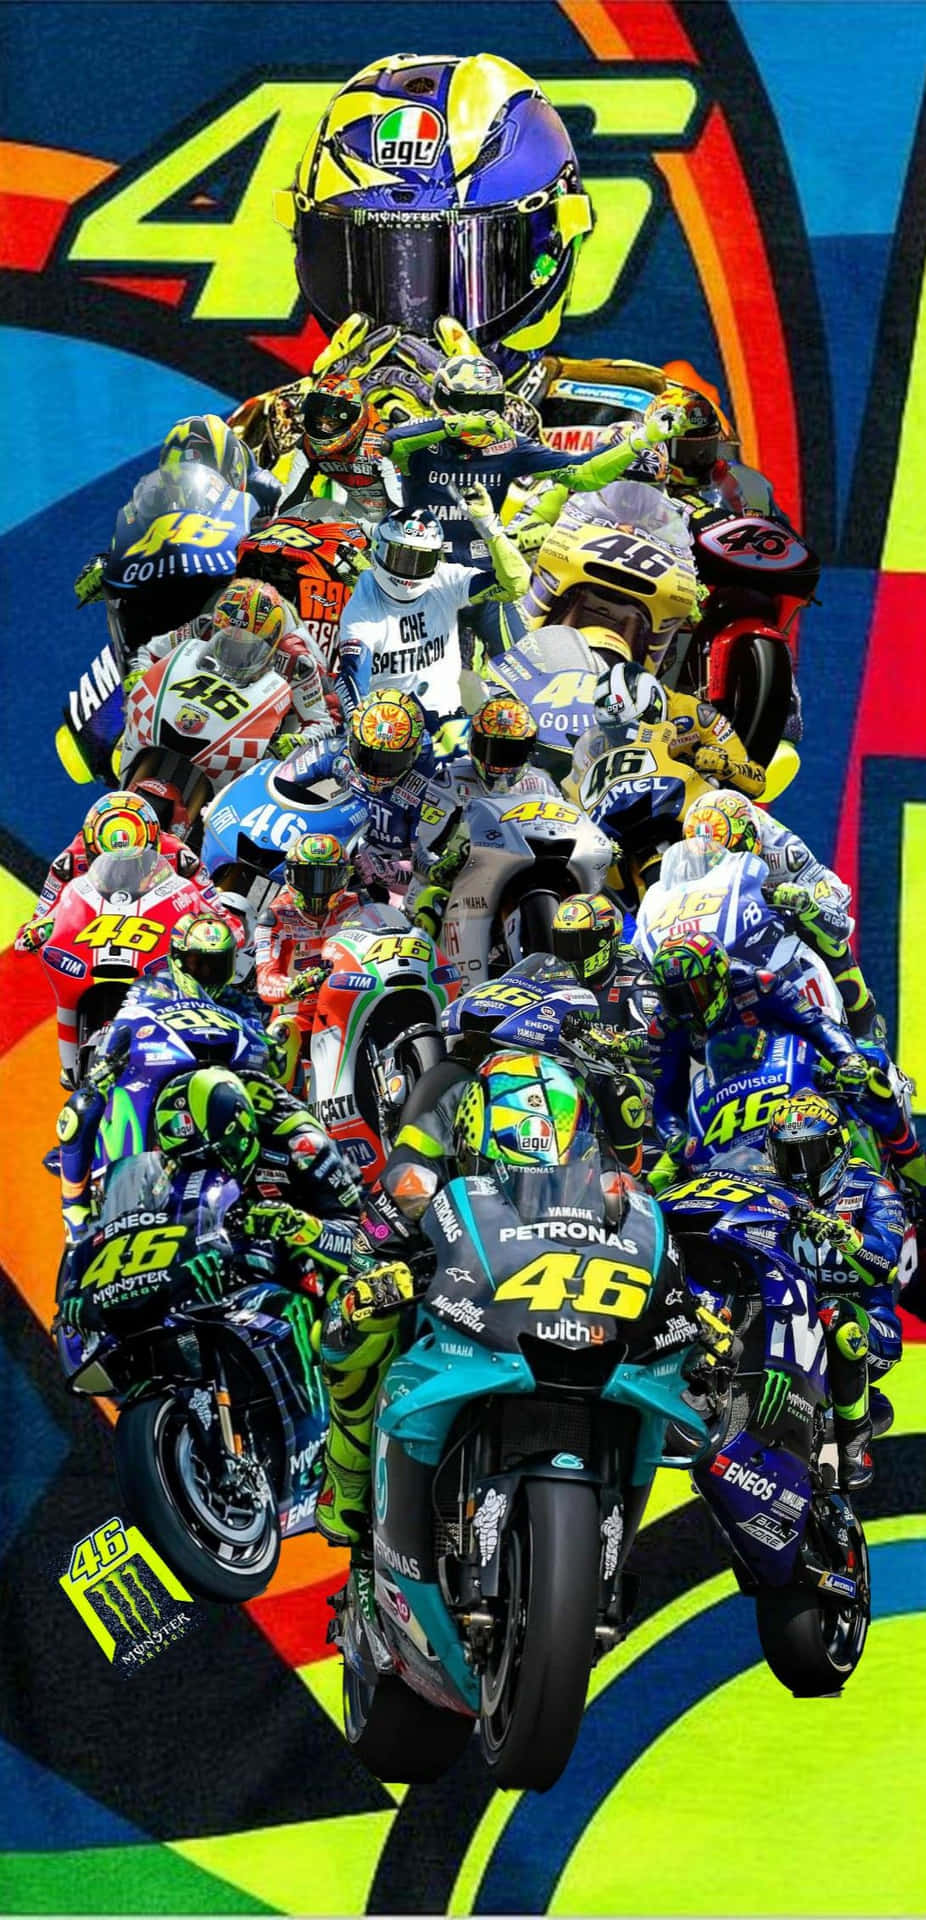 VR46 Colorful Motorcycle Poster Wallpaper